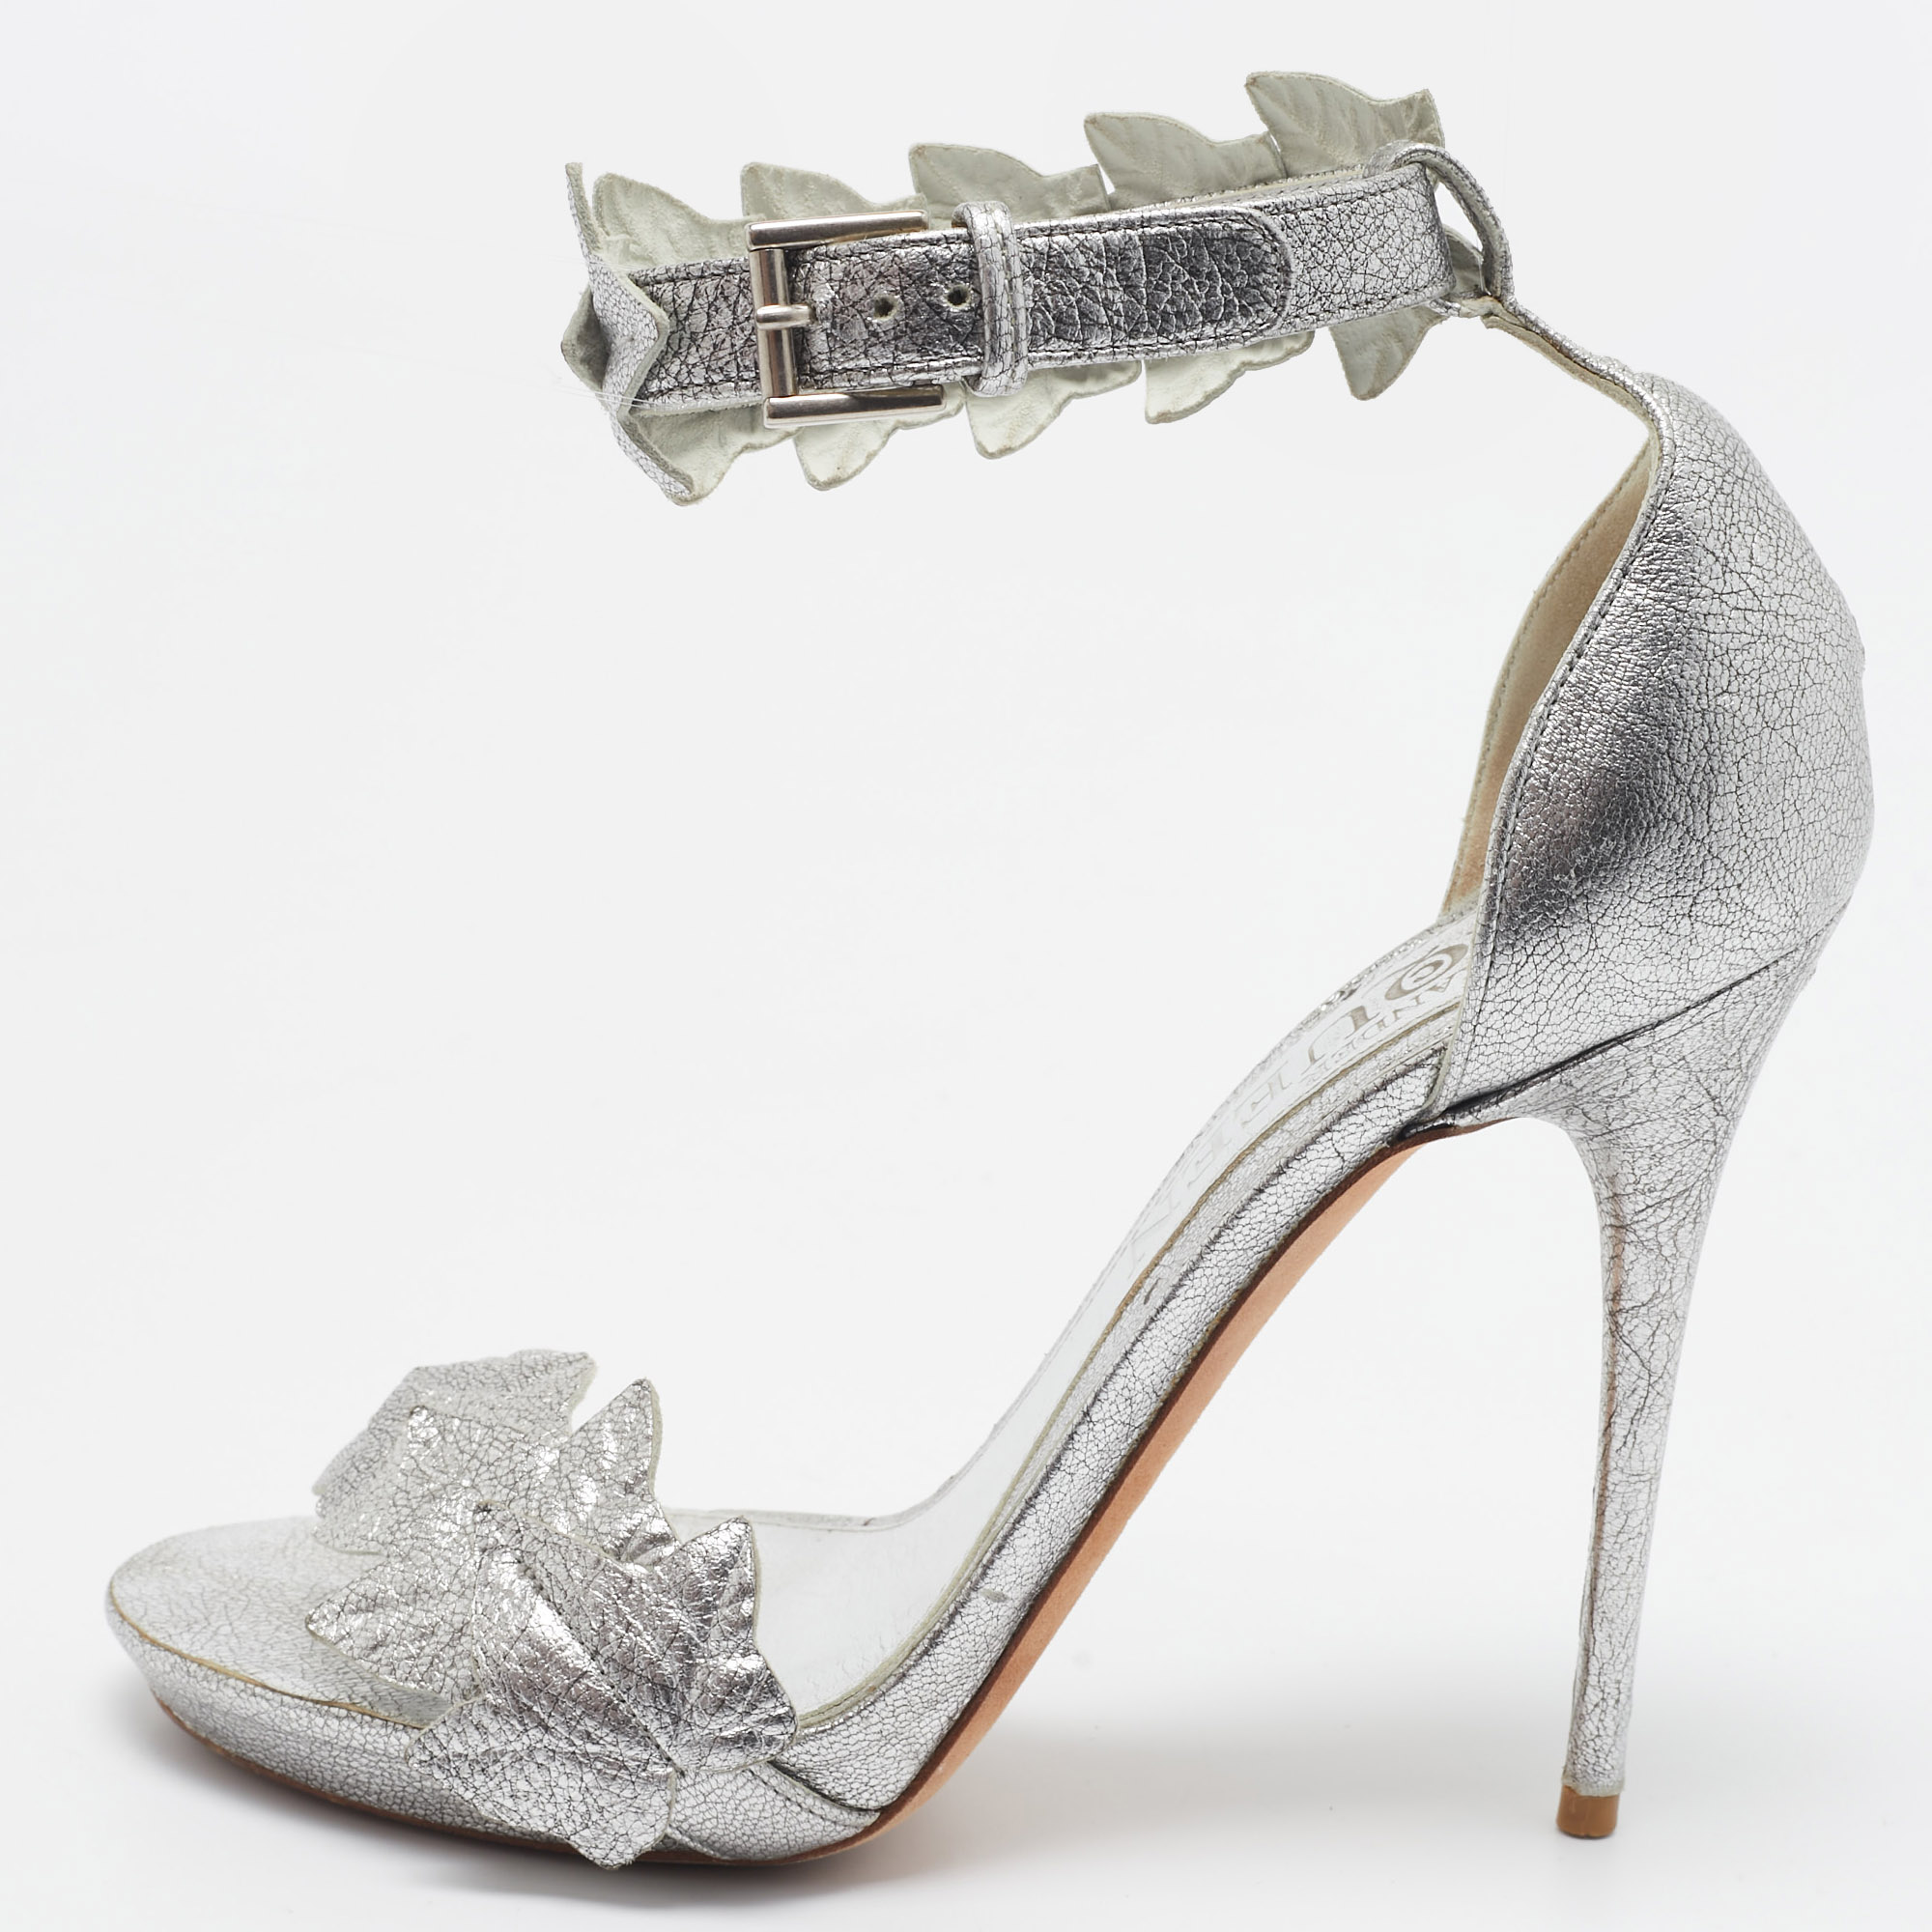 

Alexander McQueen Metallic Silver Textured Leather Ivy Leaf Embellished Open Toe Sandals Size